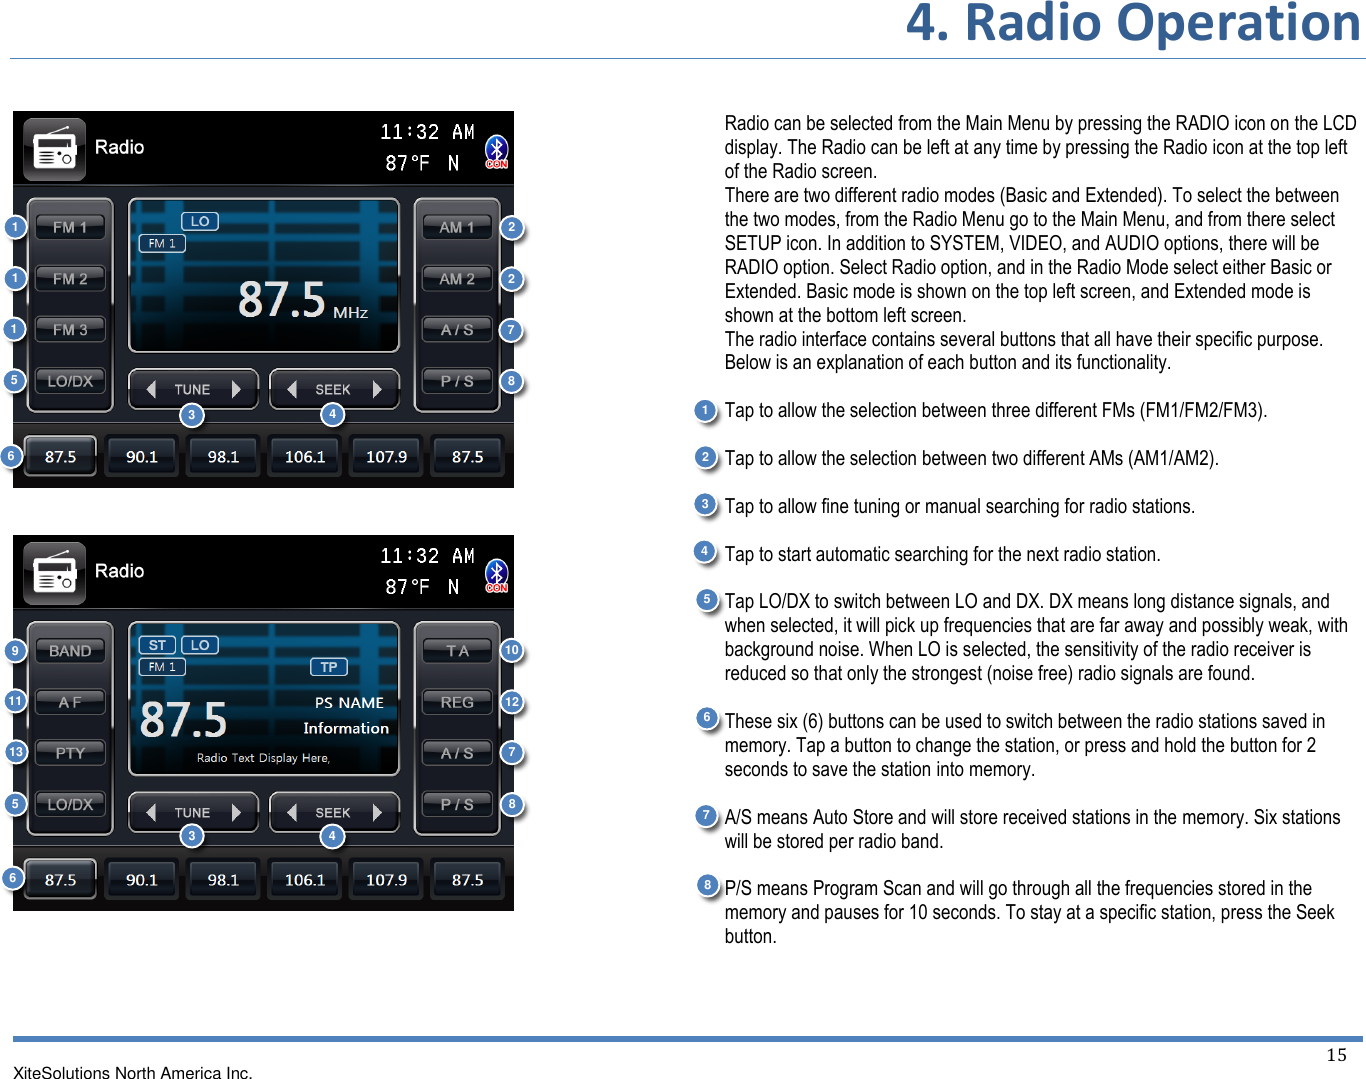 4. Radio Operation  XiteSolutions North America Inc.  15           Radio can be selected from the Main Menu by pressing the RADIO icon on the LCD display. The Radio can be left at any time by pressing the Radio icon at the top left of the Radio screen. There are two different radio modes (Basic and Extended). To select the between the two modes, from the Radio Menu go to the Main Menu, and from there select SETUP icon. In addition to SYSTEM, VIDEO, and AUDIO options, there will be RADIO option. Select Radio option, and in the Radio Mode select either Basic or Extended. Basic mode is shown on the top left screen, and Extended mode is shown at the bottom left screen. The radio interface contains several buttons that all have their specific purpose. Below is an explanation of each button and its functionality.  Tap to allow the selection between three different FMs (FM1/FM2/FM3).  Tap to allow the selection between two different AMs (AM1/AM2).  Tap to allow fine tuning or manual searching for radio stations.  Tap to start automatic searching for the next radio station.  Tap LO/DX to switch between LO and DX. DX means long distance signals, and when selected, it will pick up frequencies that are far away and possibly weak, with background noise. When LO is selected, the sensitivity of the radio receiver is reduced so that only the strongest (noise free) radio signals are found.  These six (6) buttons can be used to switch between the radio stations saved in memory. Tap a button to change the station, or press and hold the button for 2 seconds to save the station into memory.  A/S means Auto Store and will store received stations in the memory. Six stations will be stored per radio band.  P/S means Program Scan and will go through all the frequencies stored in the memory and pauses for 10 seconds. To stay at a specific station, press the Seek button.    2 3 4 69 3 8 4 5 10  11  1 1 1 1 2 7 5 67 13  2 3 12 4 5 6 7 8 8 